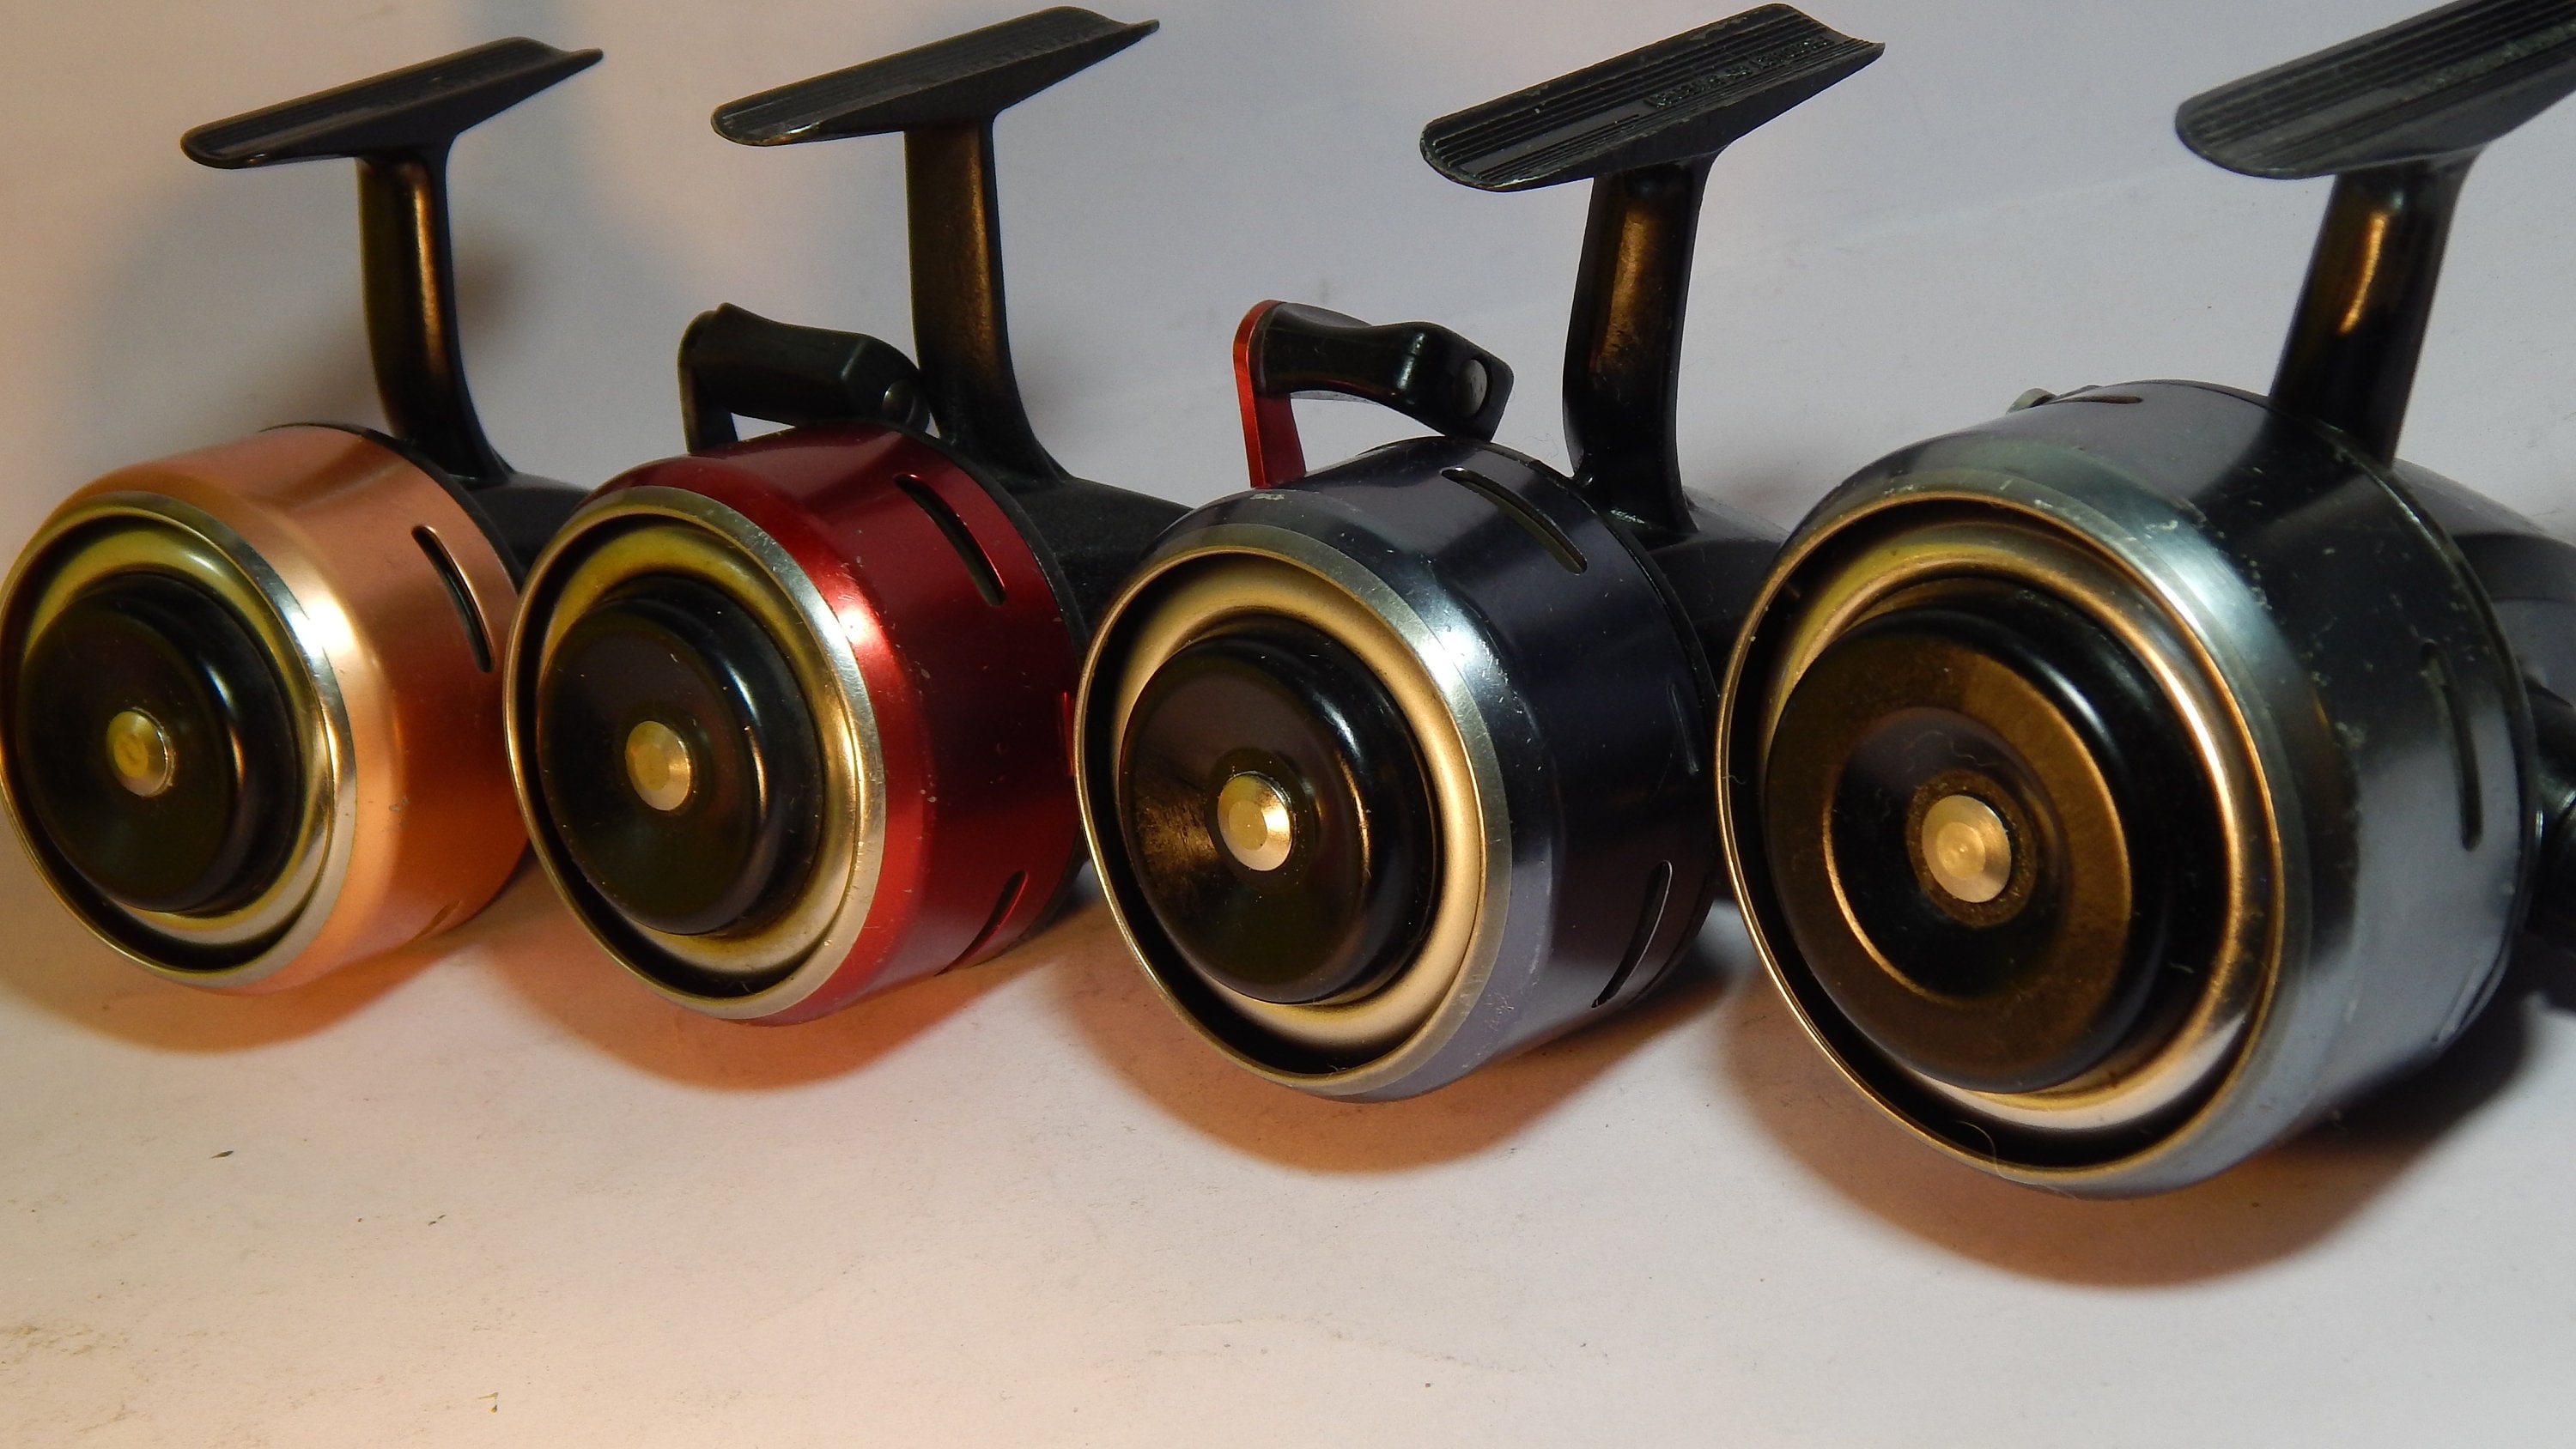 1960s' Vintage ABU 503/505/506/507 Closed-face Spinning Reel Series-usedin  Excellent Condition 